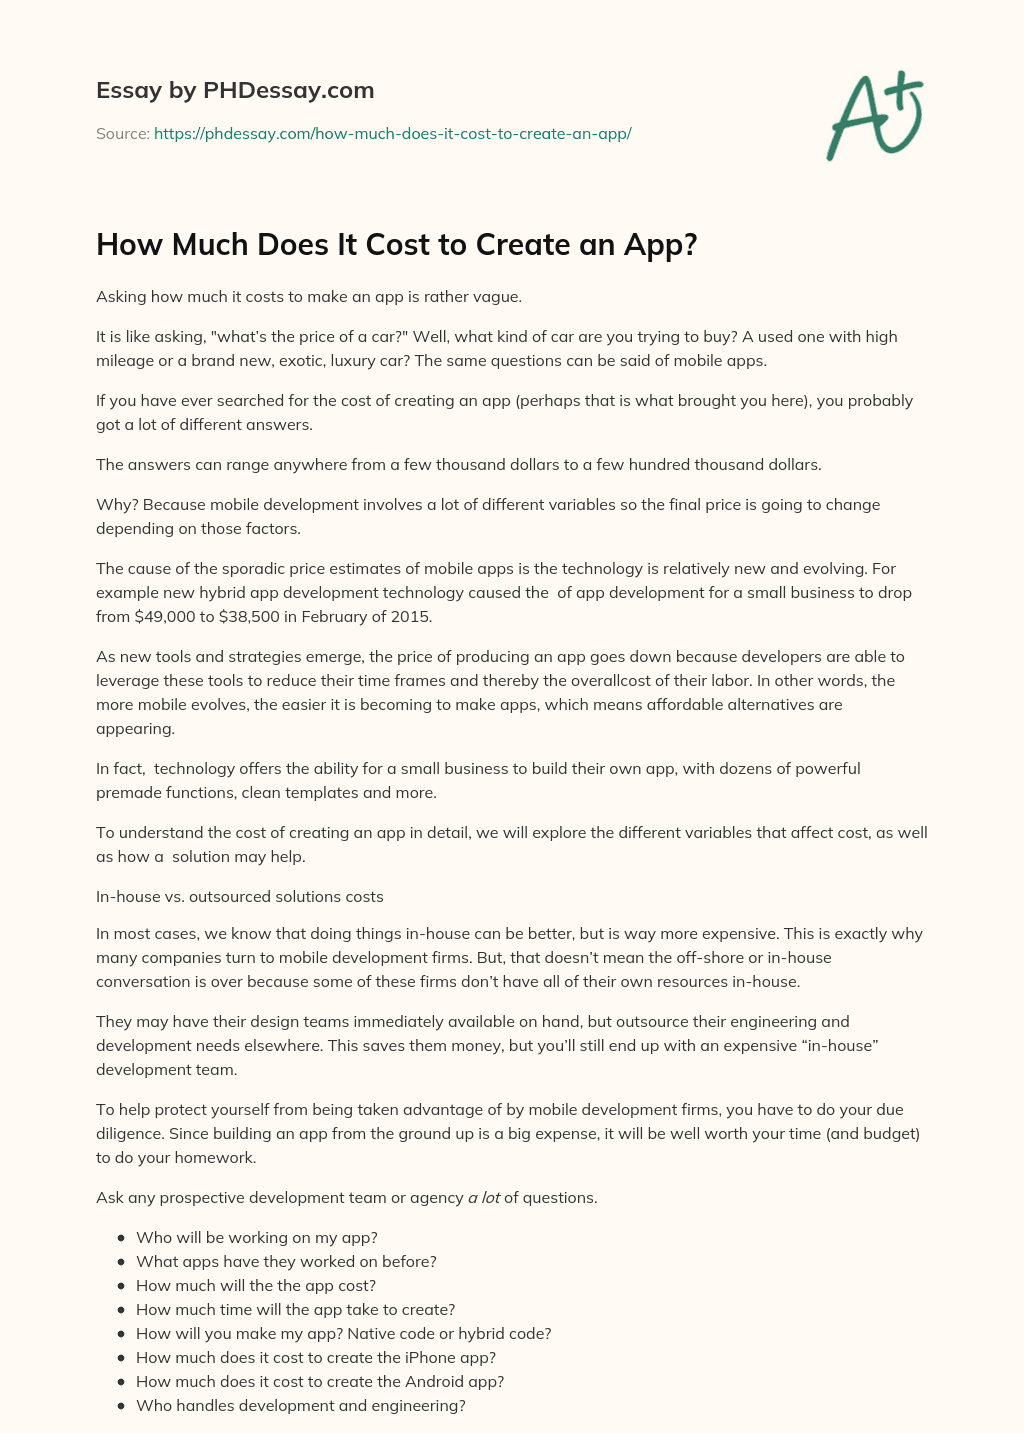 How Much Does It Cost to Create an App? essay